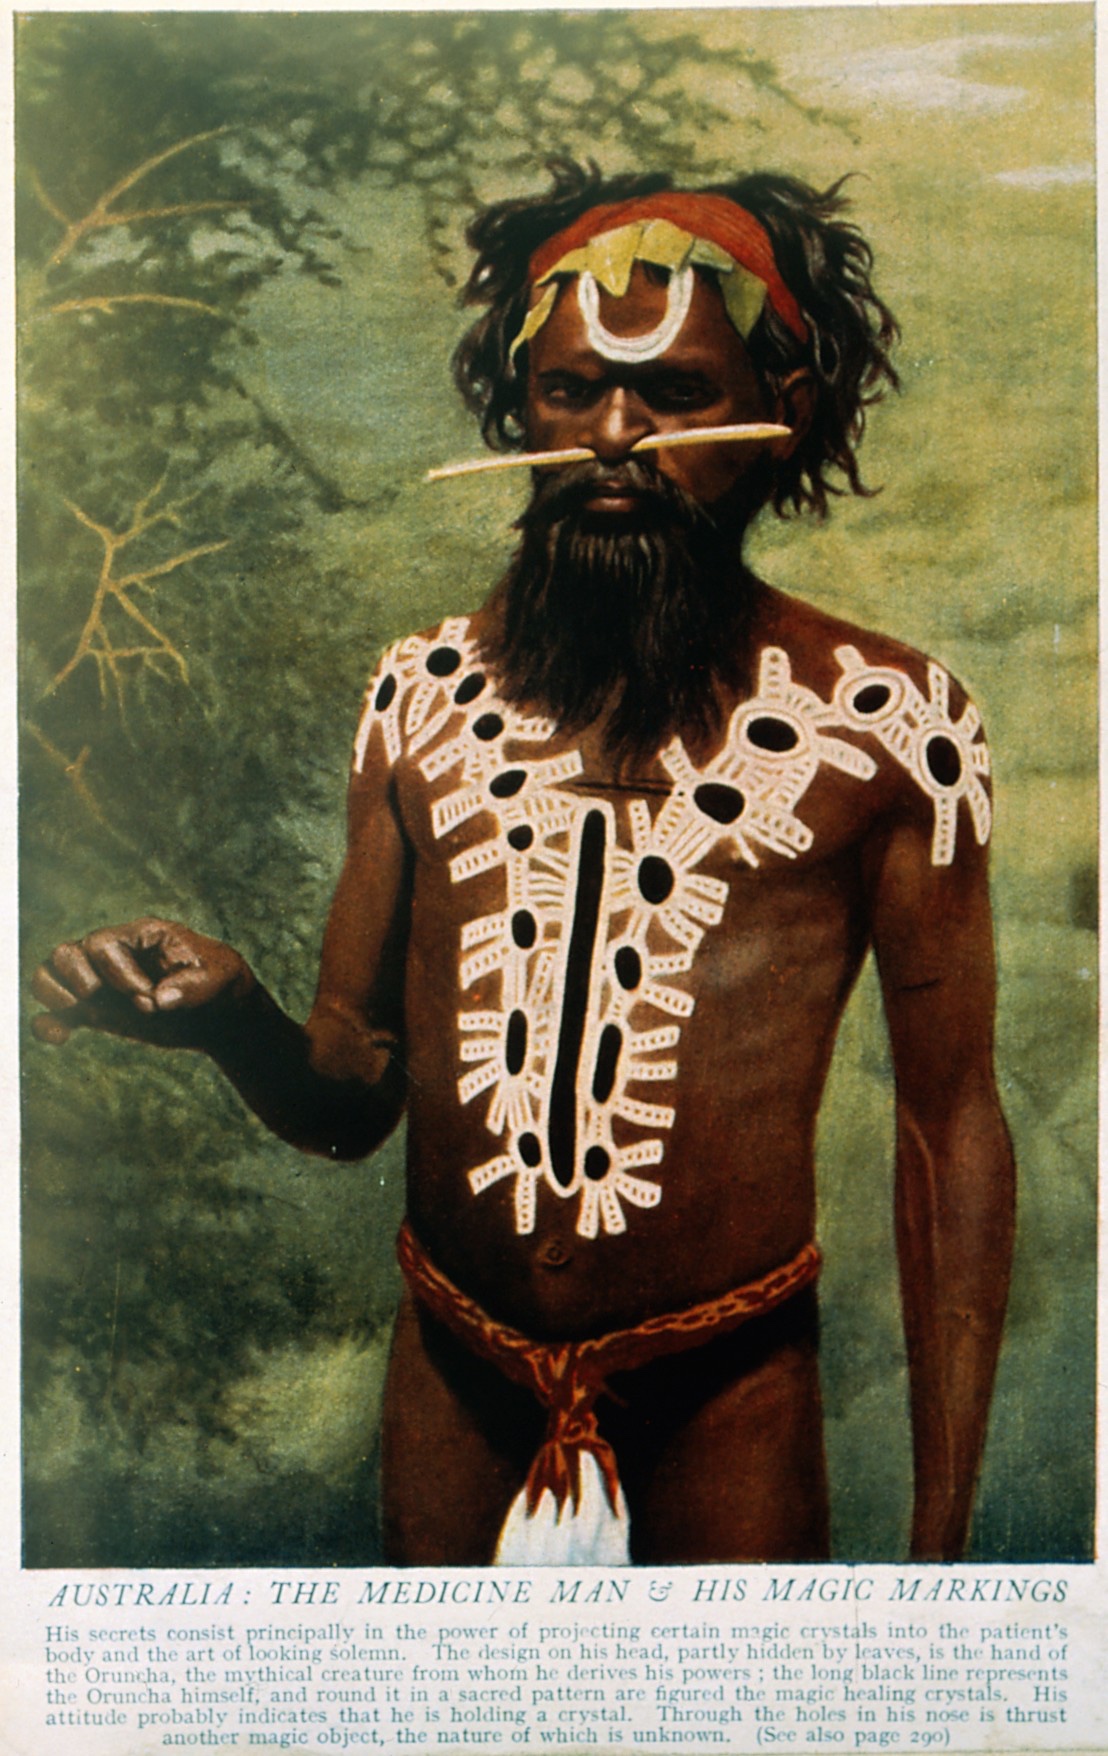 V0015977 Shaman/medicine man, body paint, Australia Credit: Wellcome Library, London. Wellcome Images images@wellcome.ac.uk http://wellcomeimages.org 1. A shaman or medicine man with extensive body painting Worgaia, Central Australia. Process print. 2. A shaman or medicine man with extensive body painting and nose stick, Australia. Colour process print. Published:  -  Copyrighted work available under Creative Commons Attribution only licence CC BY 4.0 http://creativecommons.org/licenses/by/4.0/